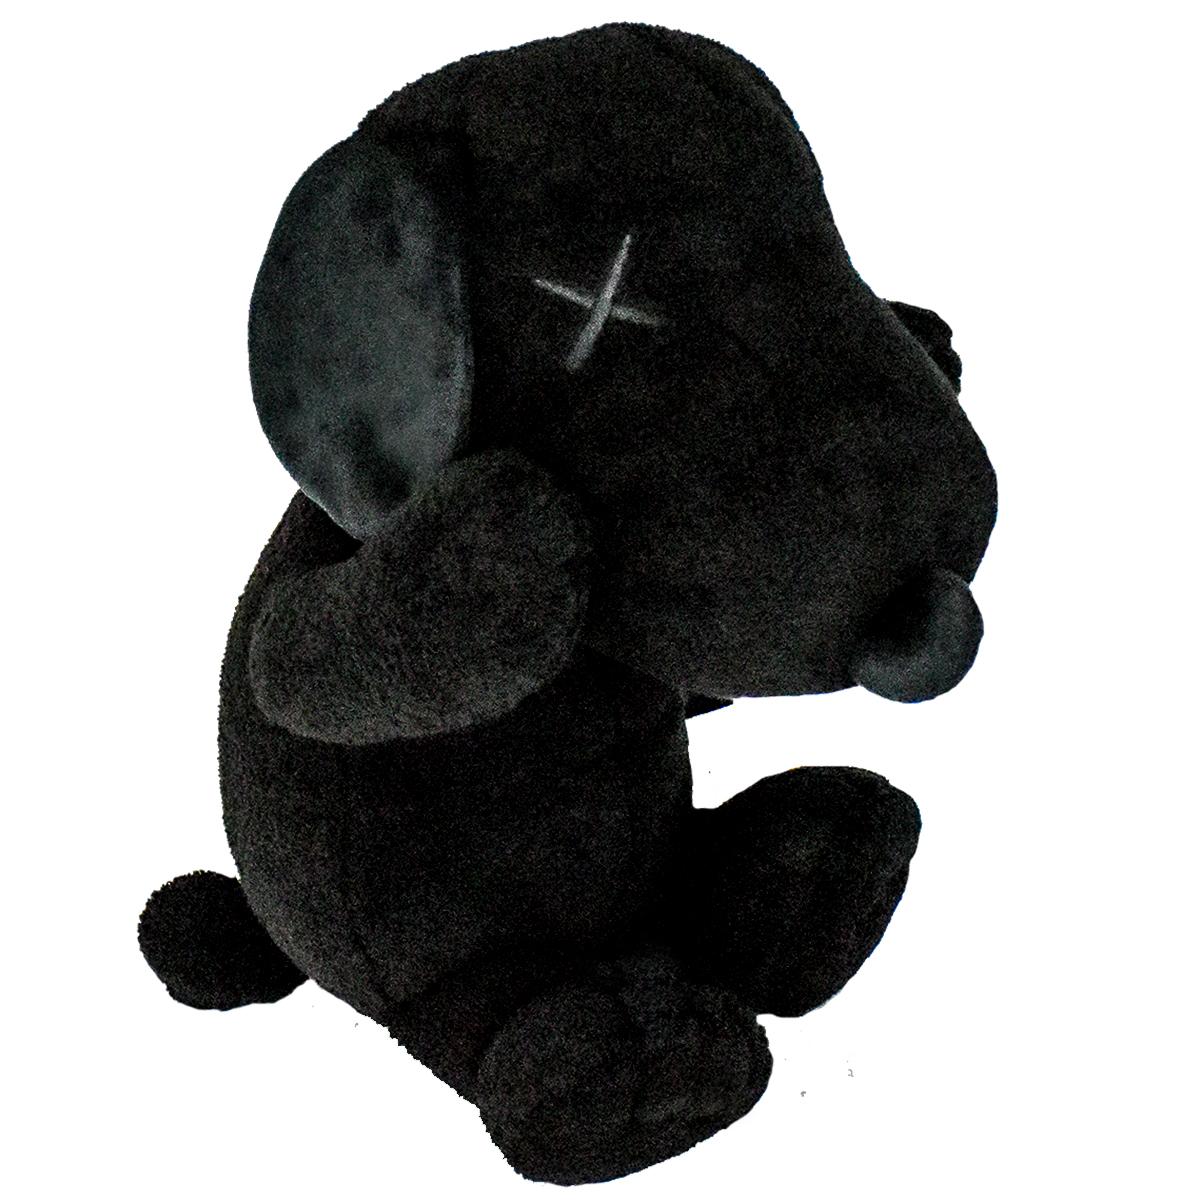 Super soft Kaws X Peanuts collaboration Plush.
NYC inspired edition in the all black design.
Re-imagined by Kaws complete with the recognizable Kaws X eyes.
Made and released by Uniqlo in 2017.
Has band collar around Snoopy neck the reads “KAWS X